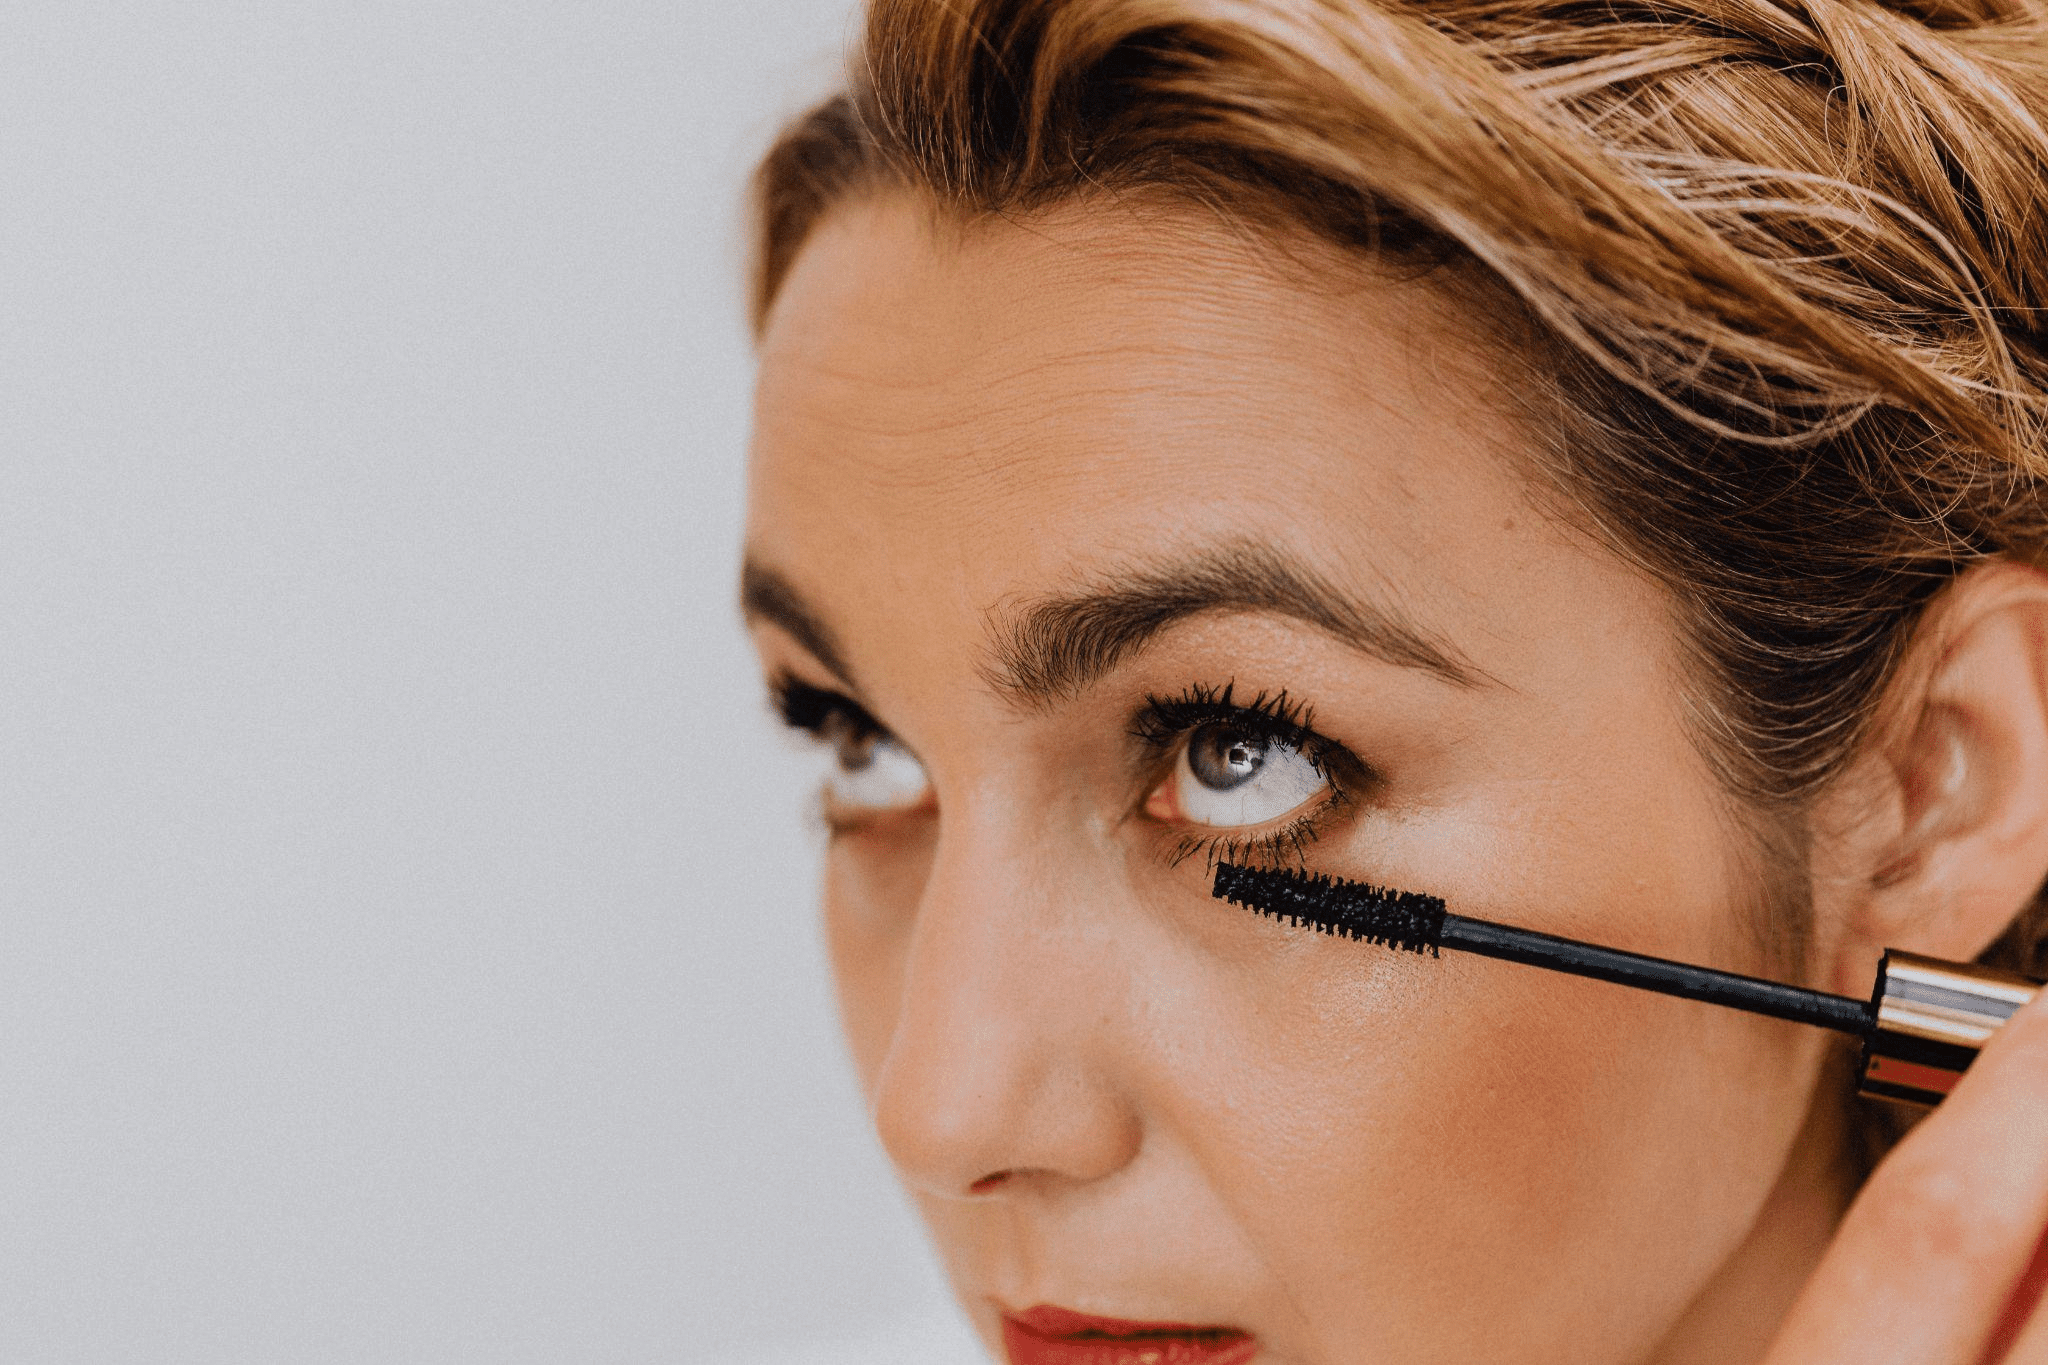 Can You Go Swimming With Eyelash Extensions? Myth Busted